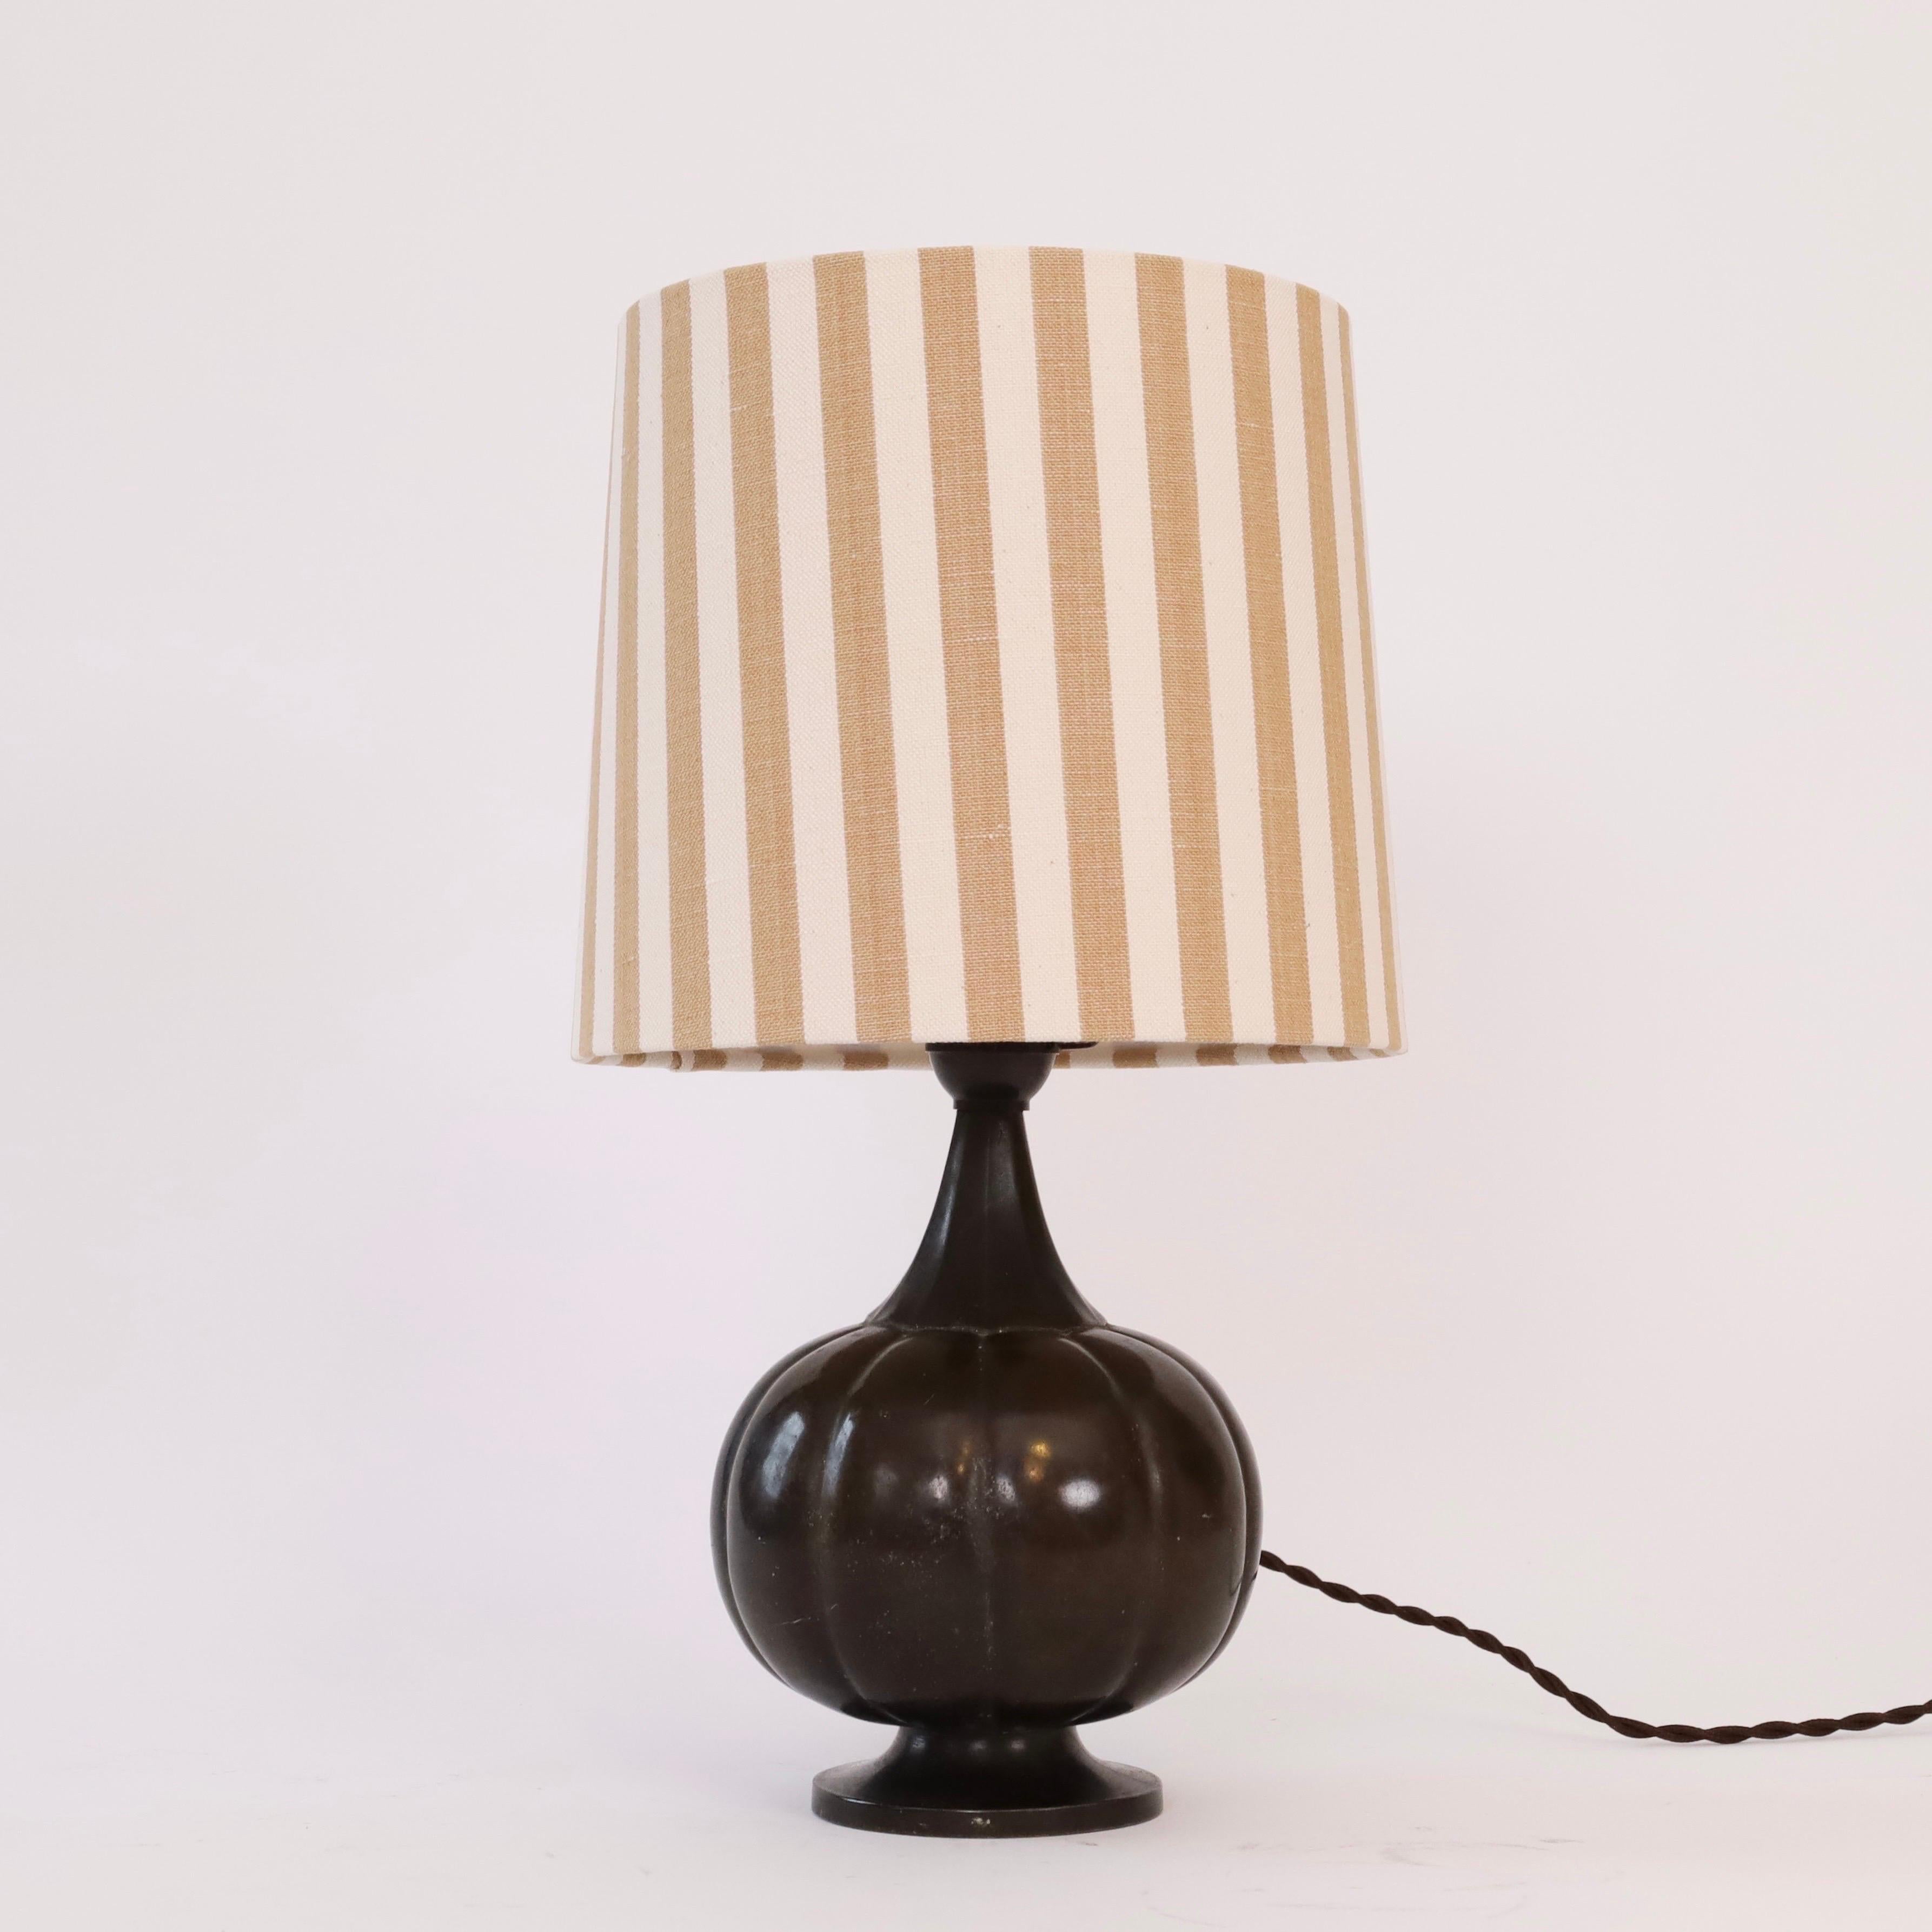 Metal Set of round Just Andersen Table Lamps, 1920s, Denmark For Sale